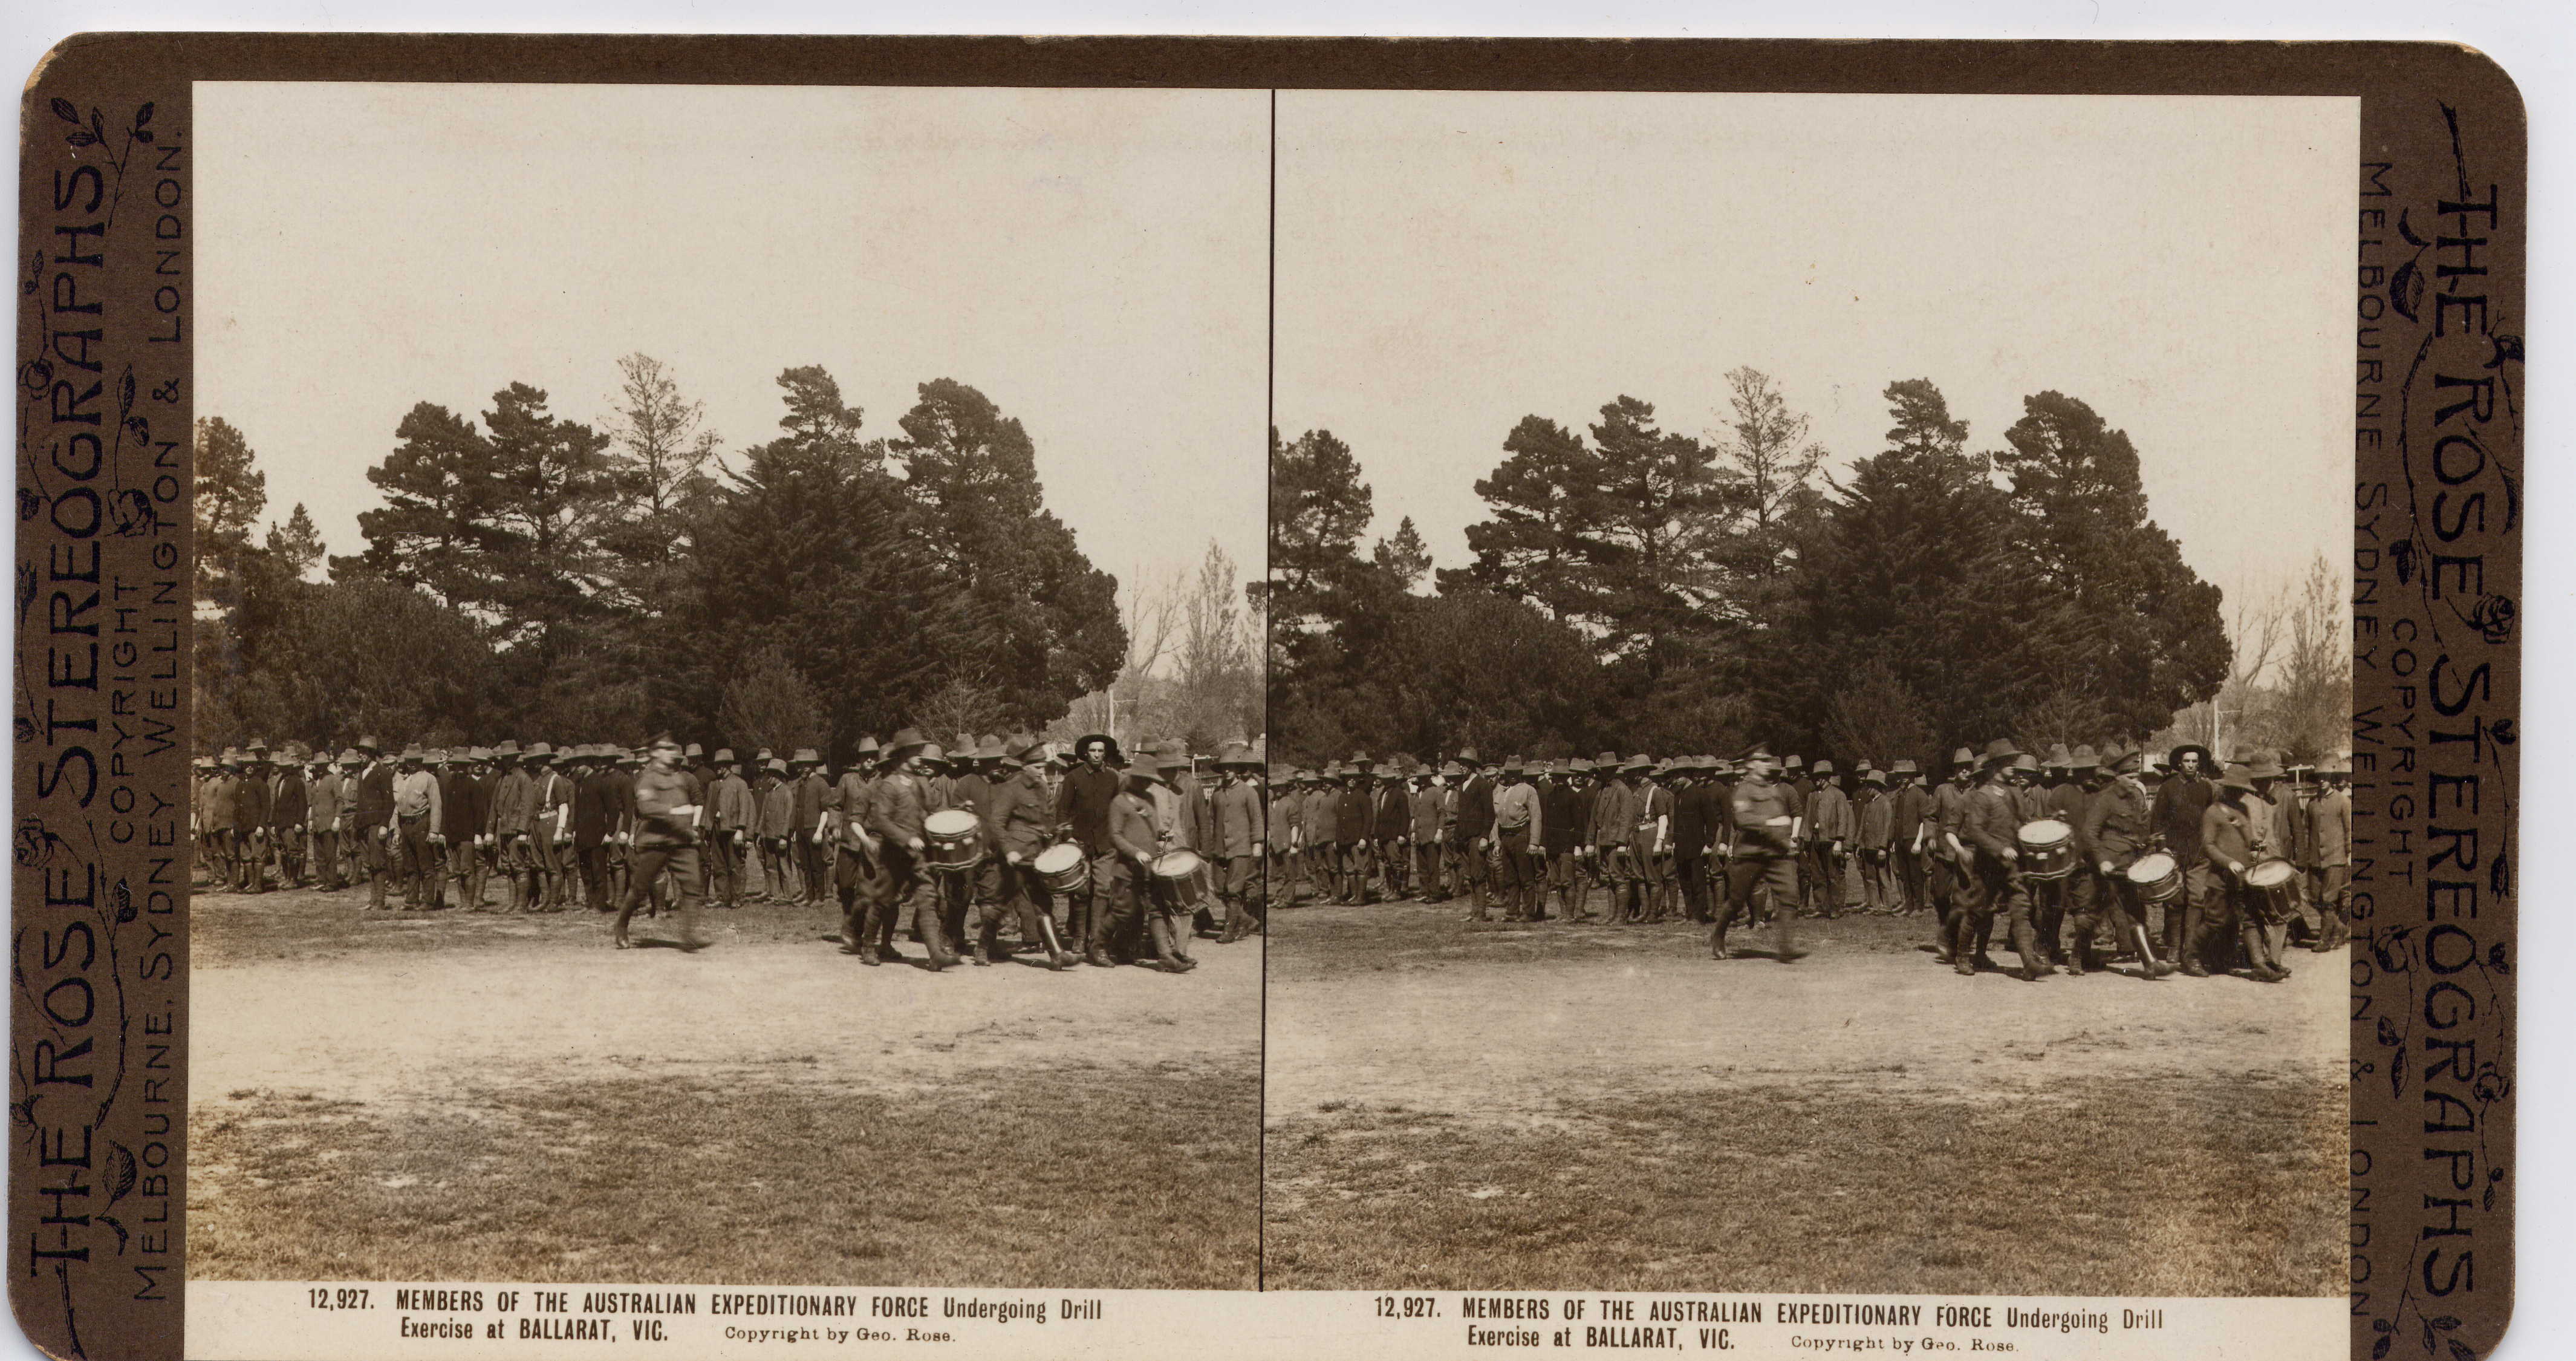 MEMBERS OF THE AUSTRALIAN EXPEDITIONARY FORCE Undergoing Exercise at BALLARAT, VIC.